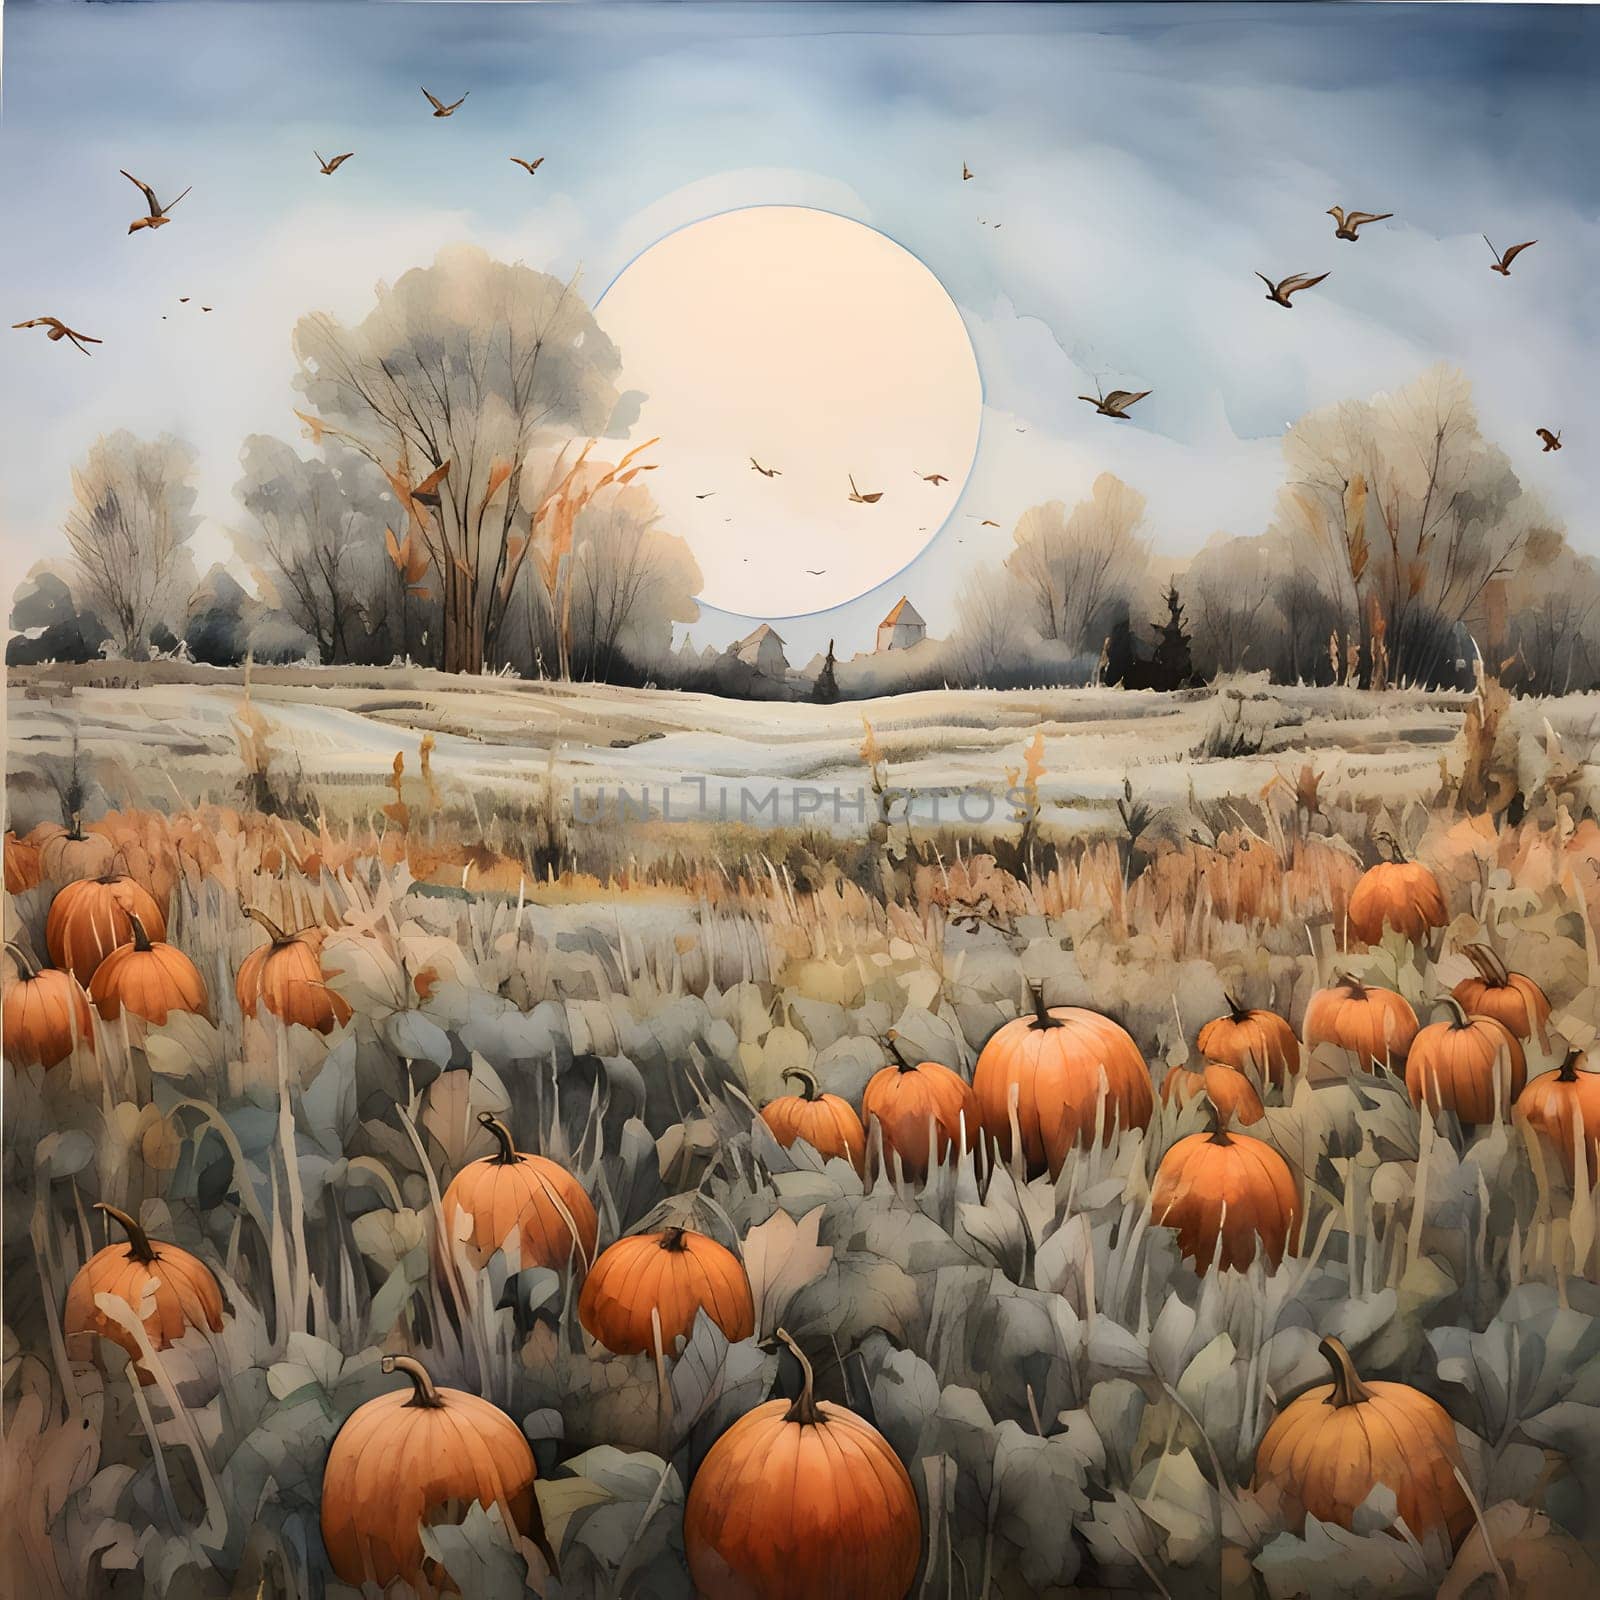 Illustration; pumpkins in the middle of tall leaves in the background moon flying birds paint picture. Pumpkin as a dish of thanksgiving for the harvest. An atmosphere of joy and celebration.